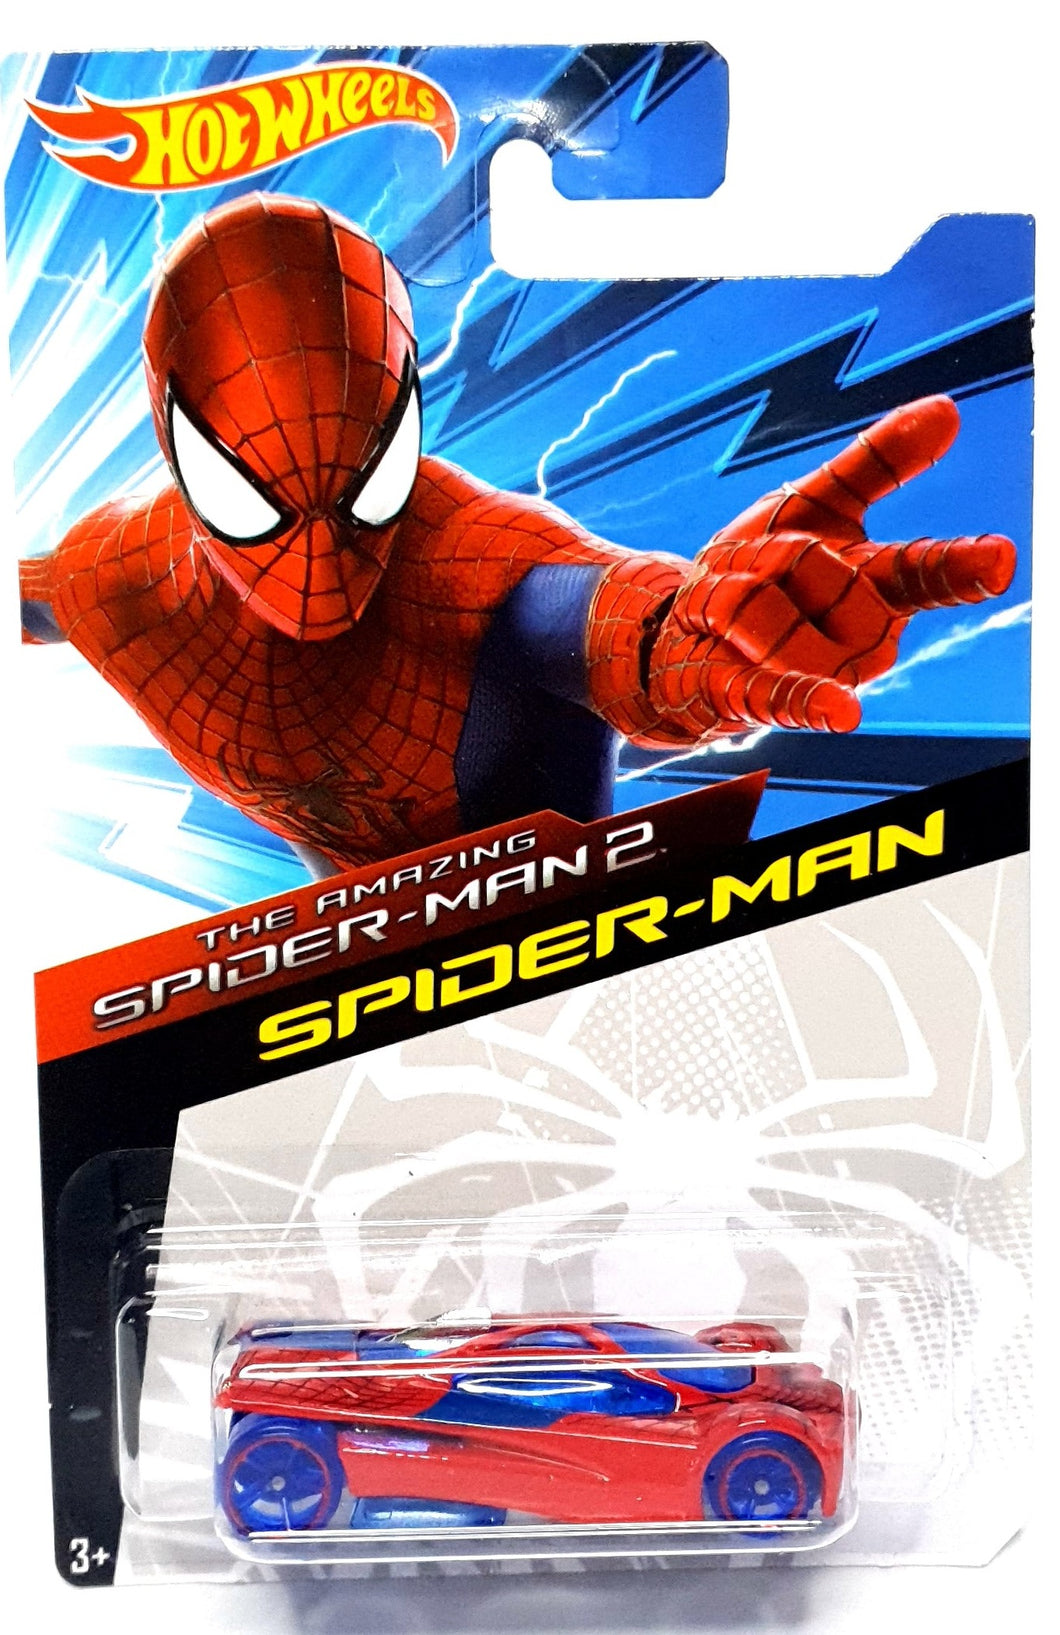 Hot Wheels - SPIDER-MAN CAR THE AMAZING SPIDER-MAN 2 Carded Character Vehicle Car